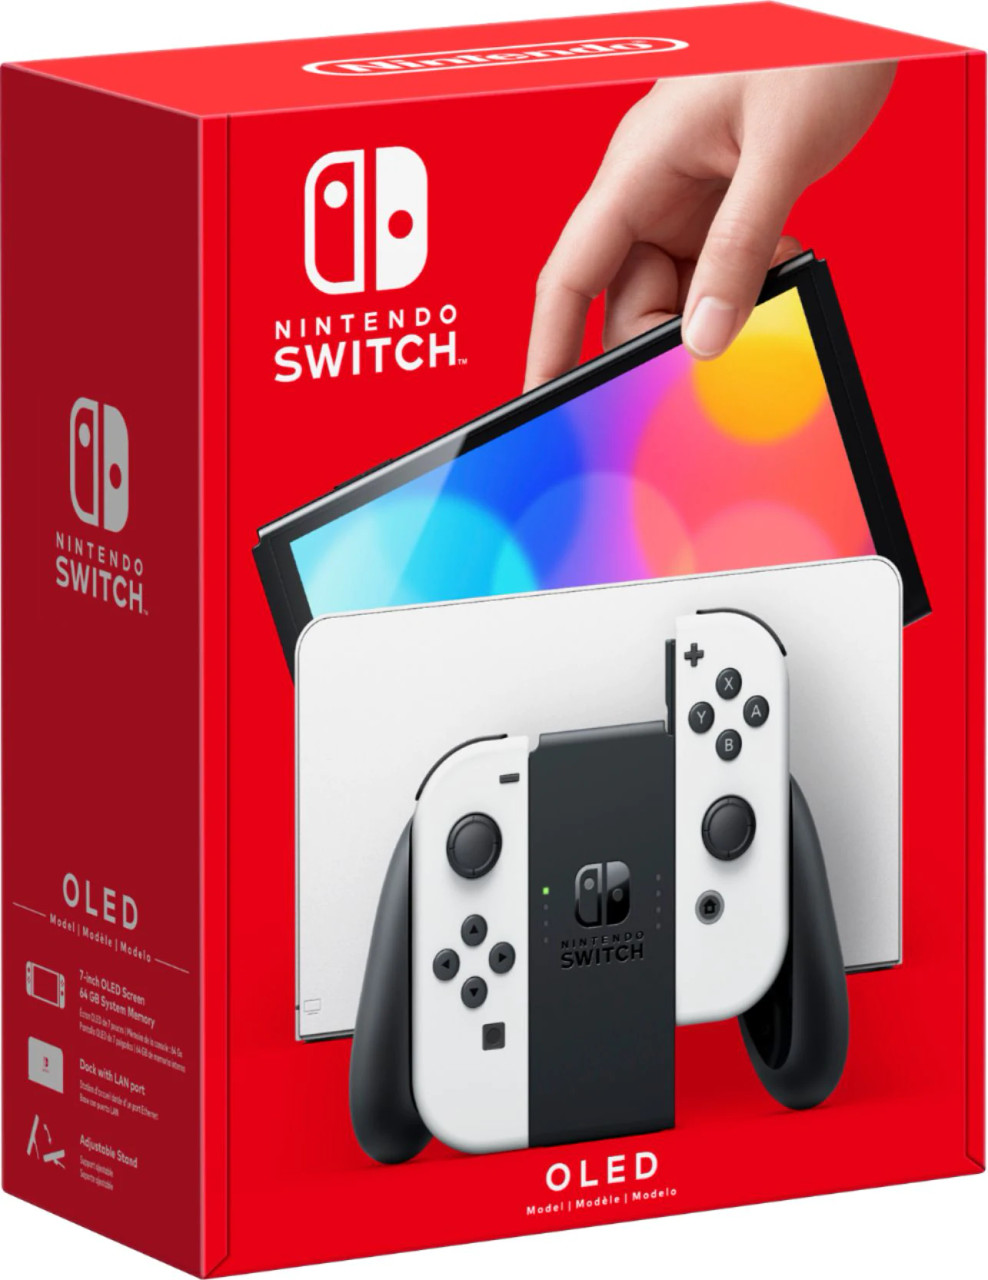 Nintendo Switch OLED Model | Buy Online At Best Price | Mojo Computers | Switch